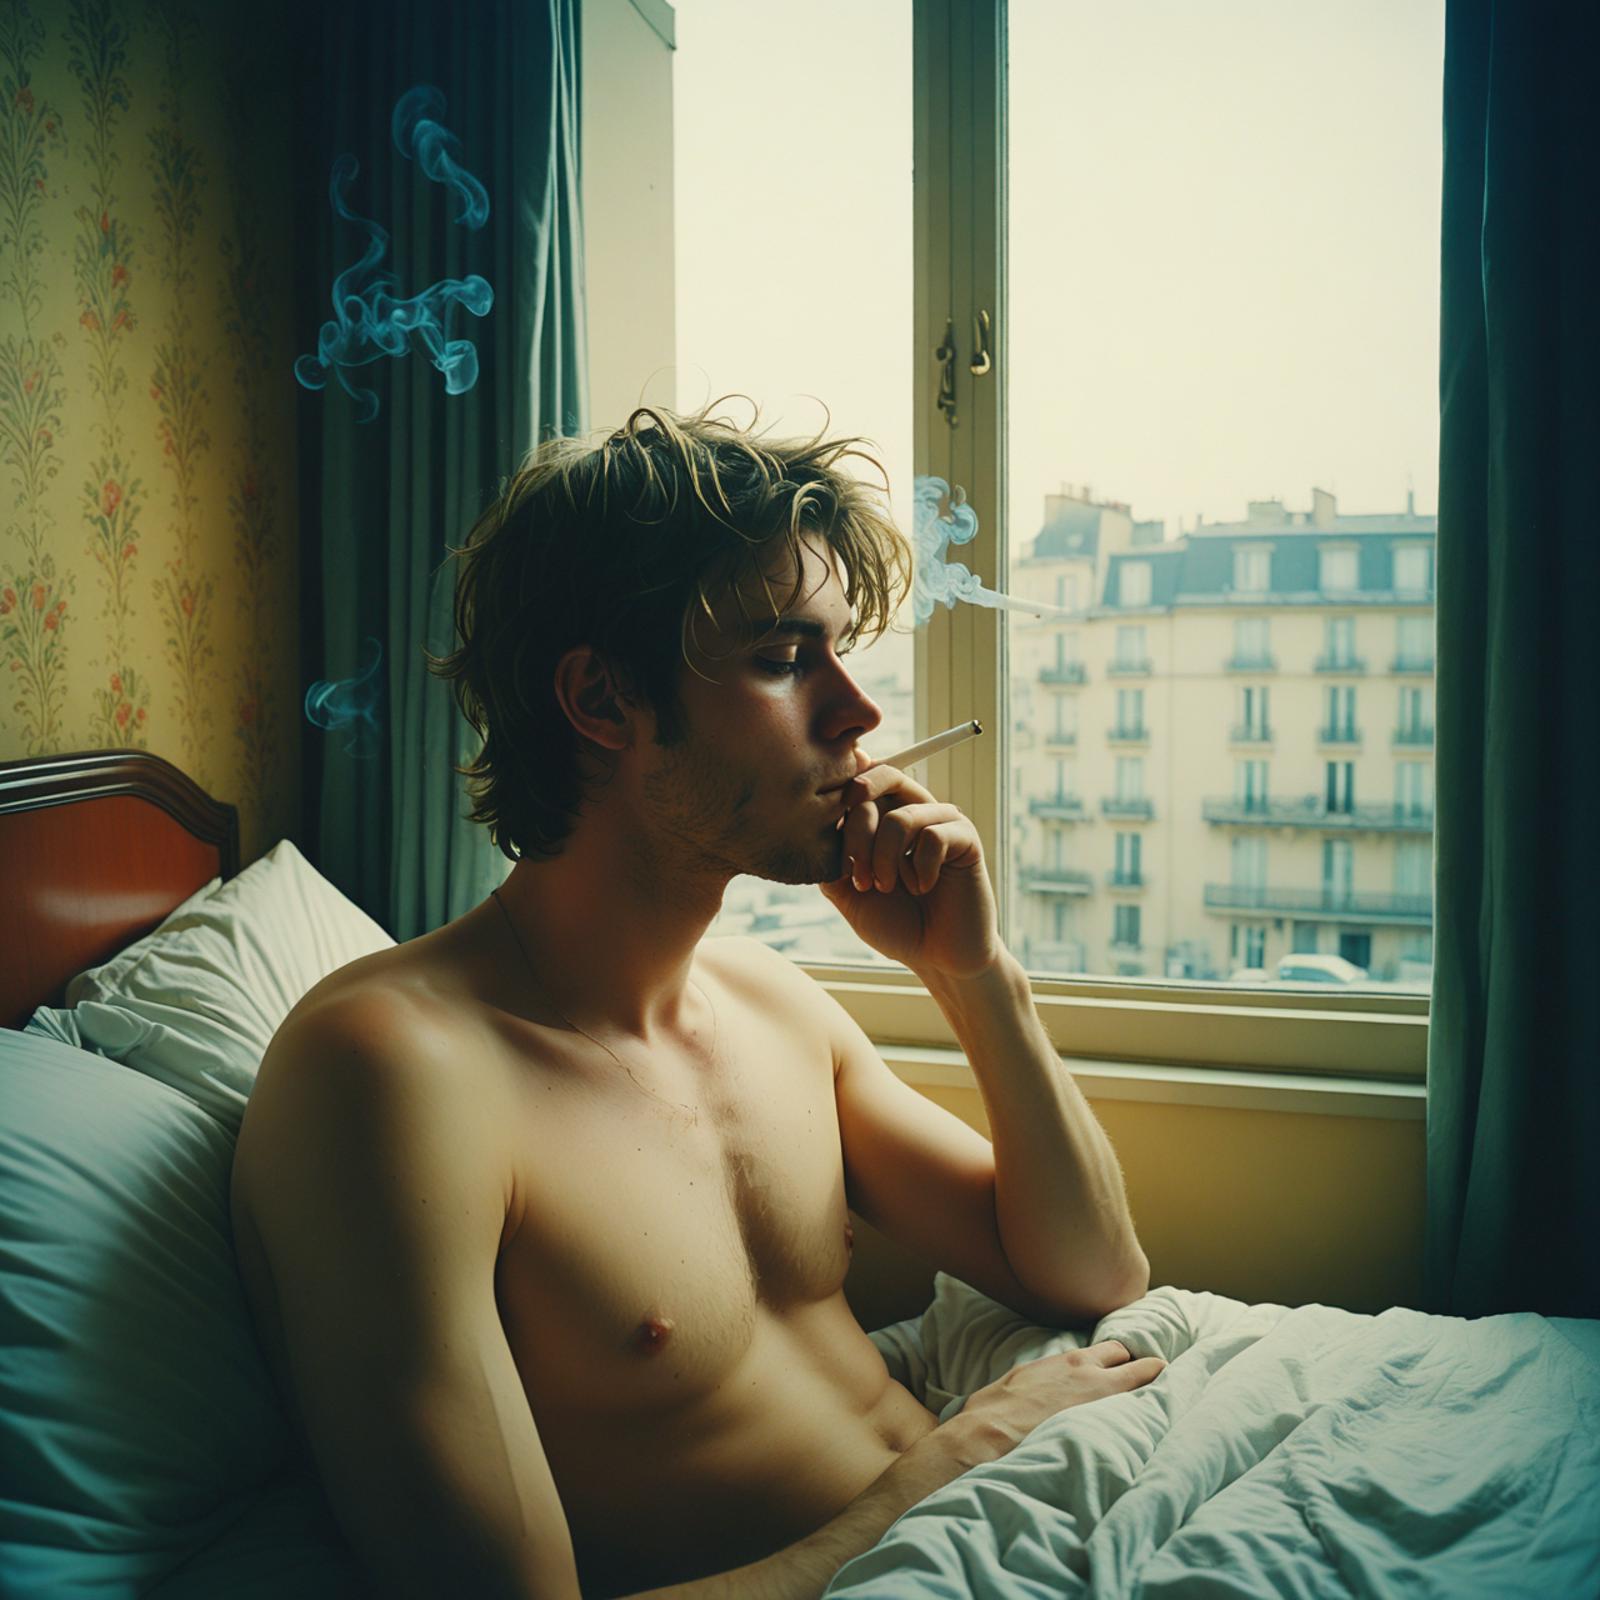 A shirtless man smoking a cigarette in bed in front of a window.